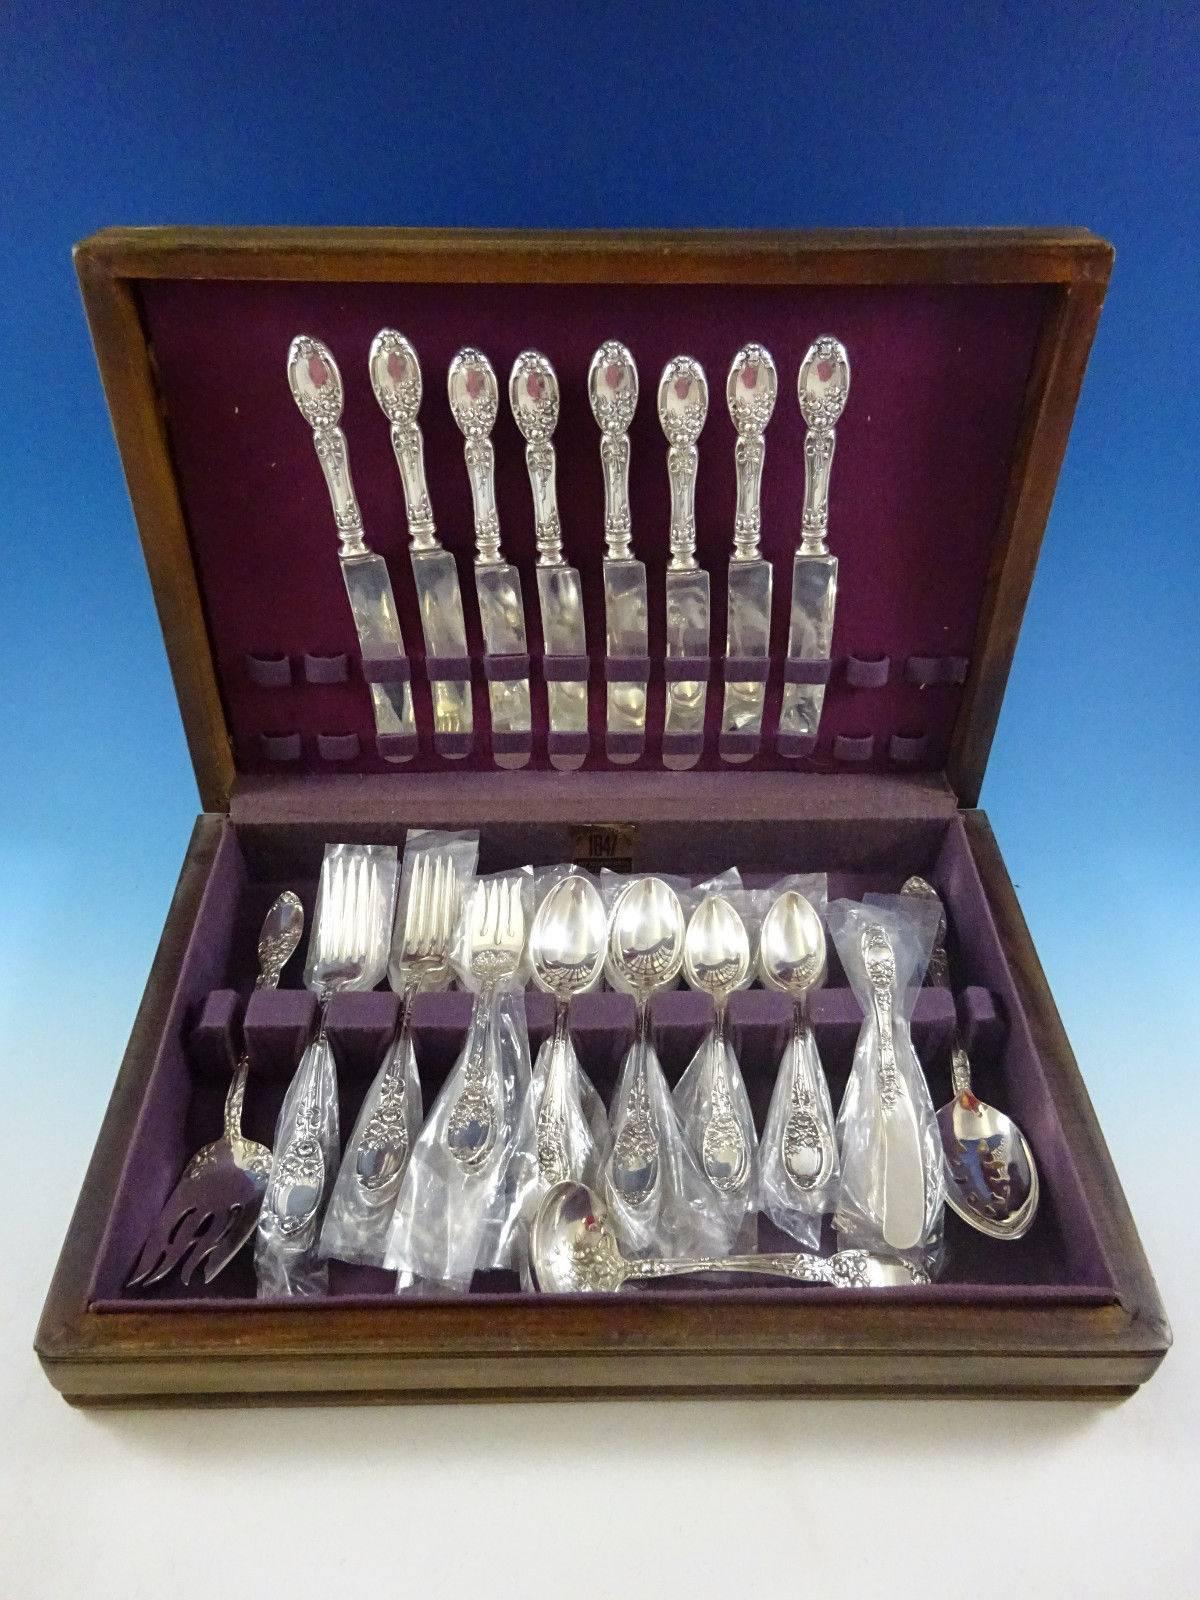 Brides Bouquet by Alvin silver plate flatware set of 52 pieces. This set includes: Eight knives, 8 7/8